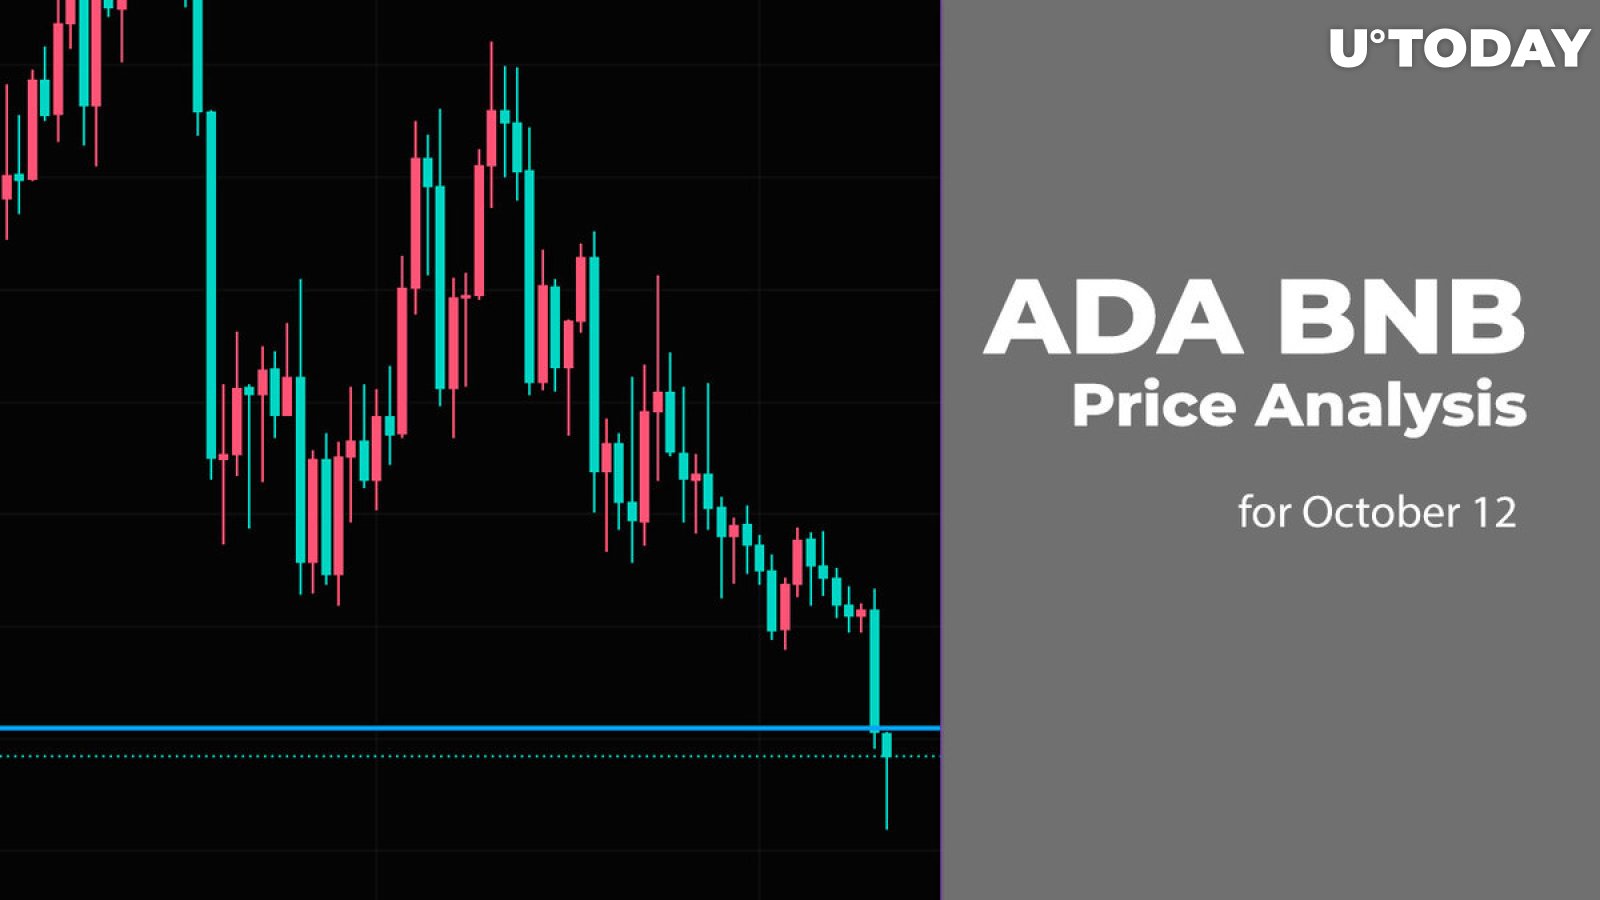 ADA and BNB Price Analysis for October 12